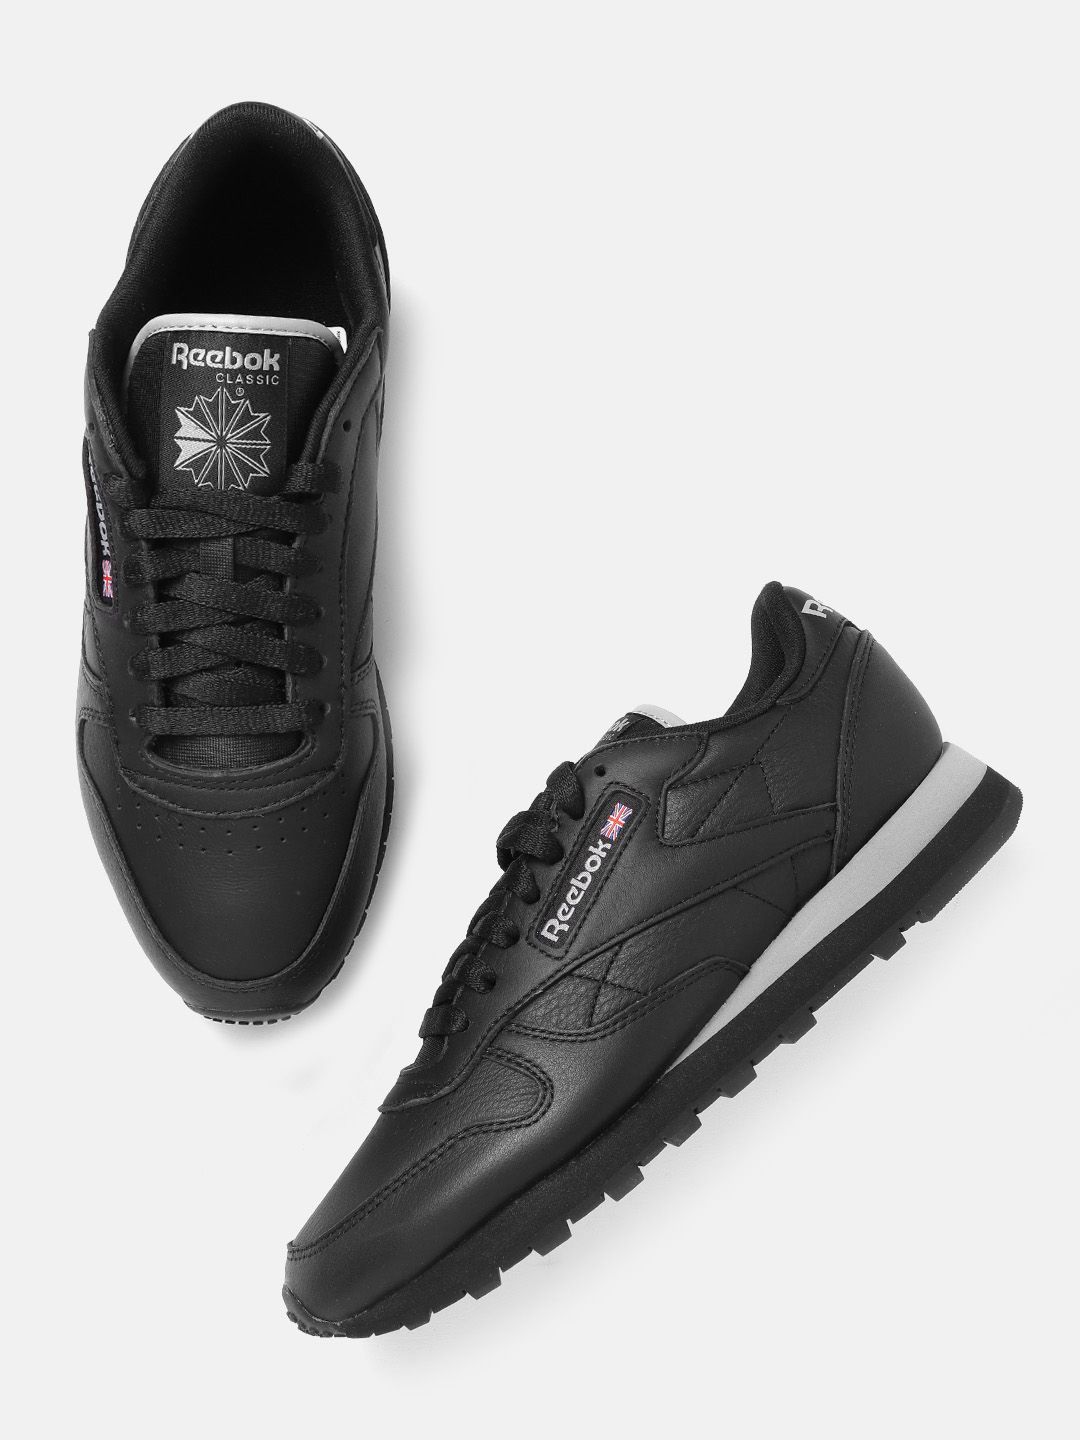 Reebok Classic Unisex Black & Grey Perforated Leather Sneakers Price in India